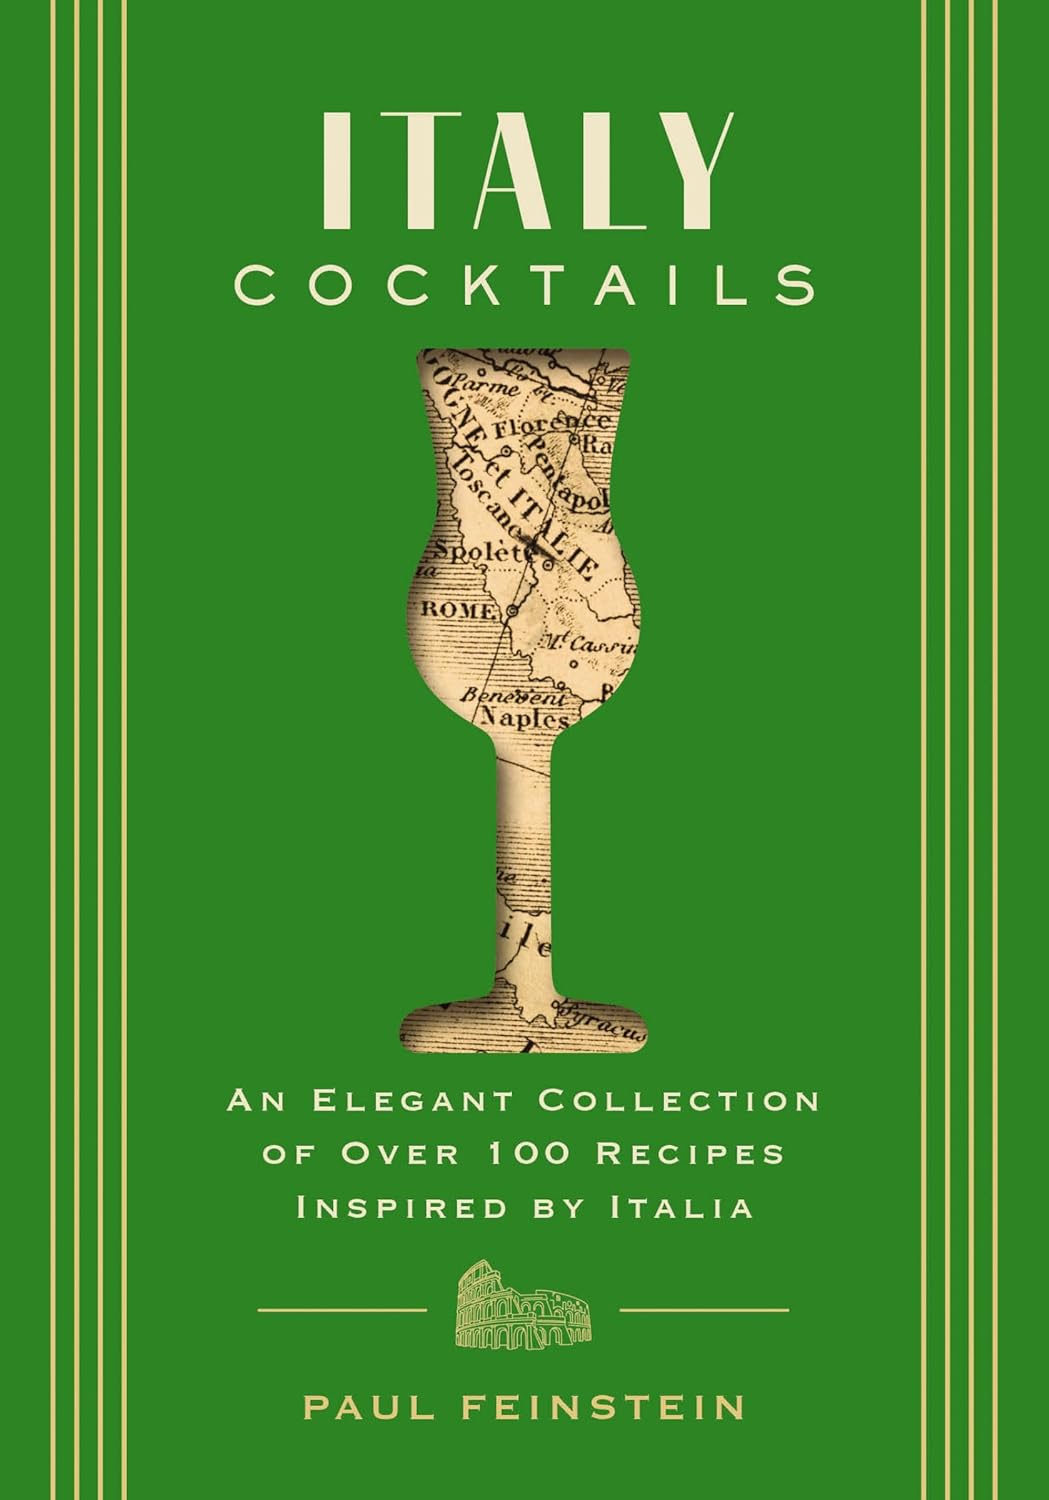 Best Cocktail Books According to Bartenders